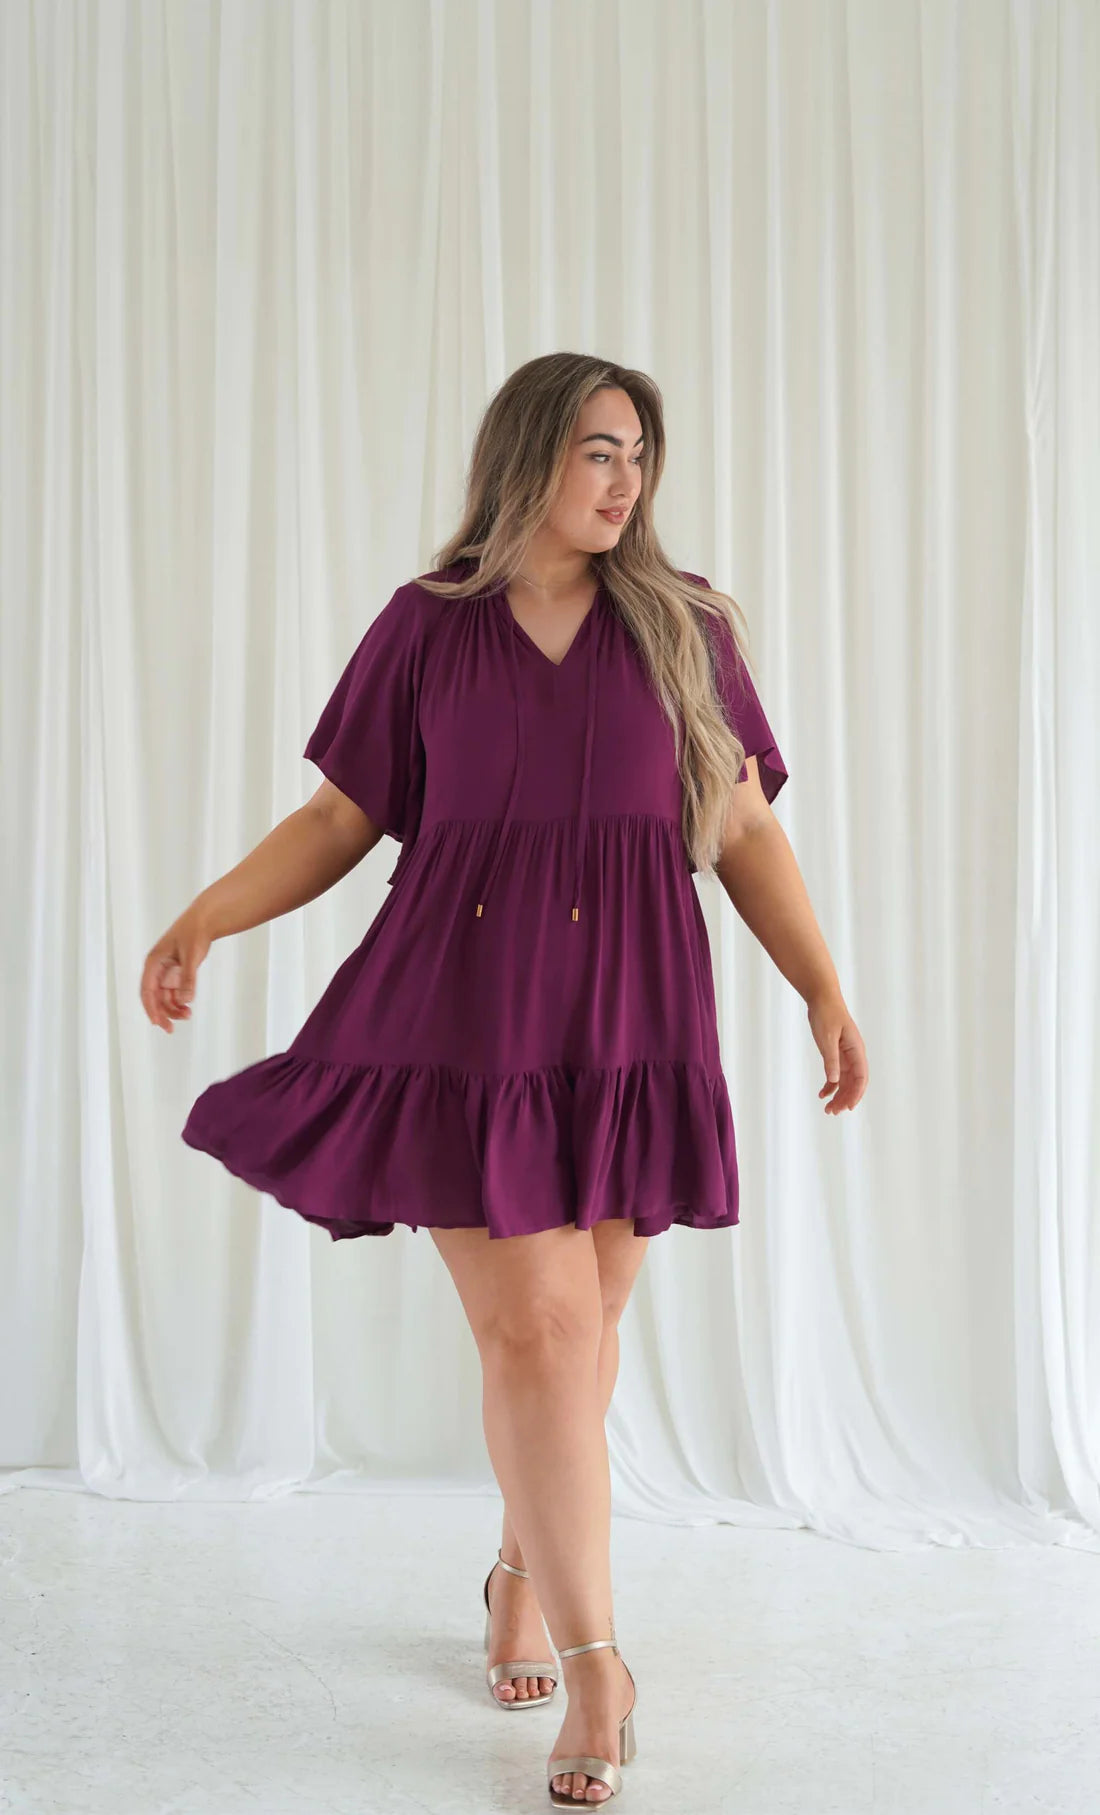 Jamie Dress: 
The Jamie Dress is comfy, easy to style and supwr light for warmer weather. A knee-length frock that drapes divinely, you can slip into the Jamie dress and strut wi - Ciao Bella Dresses - Dani Marie the Label